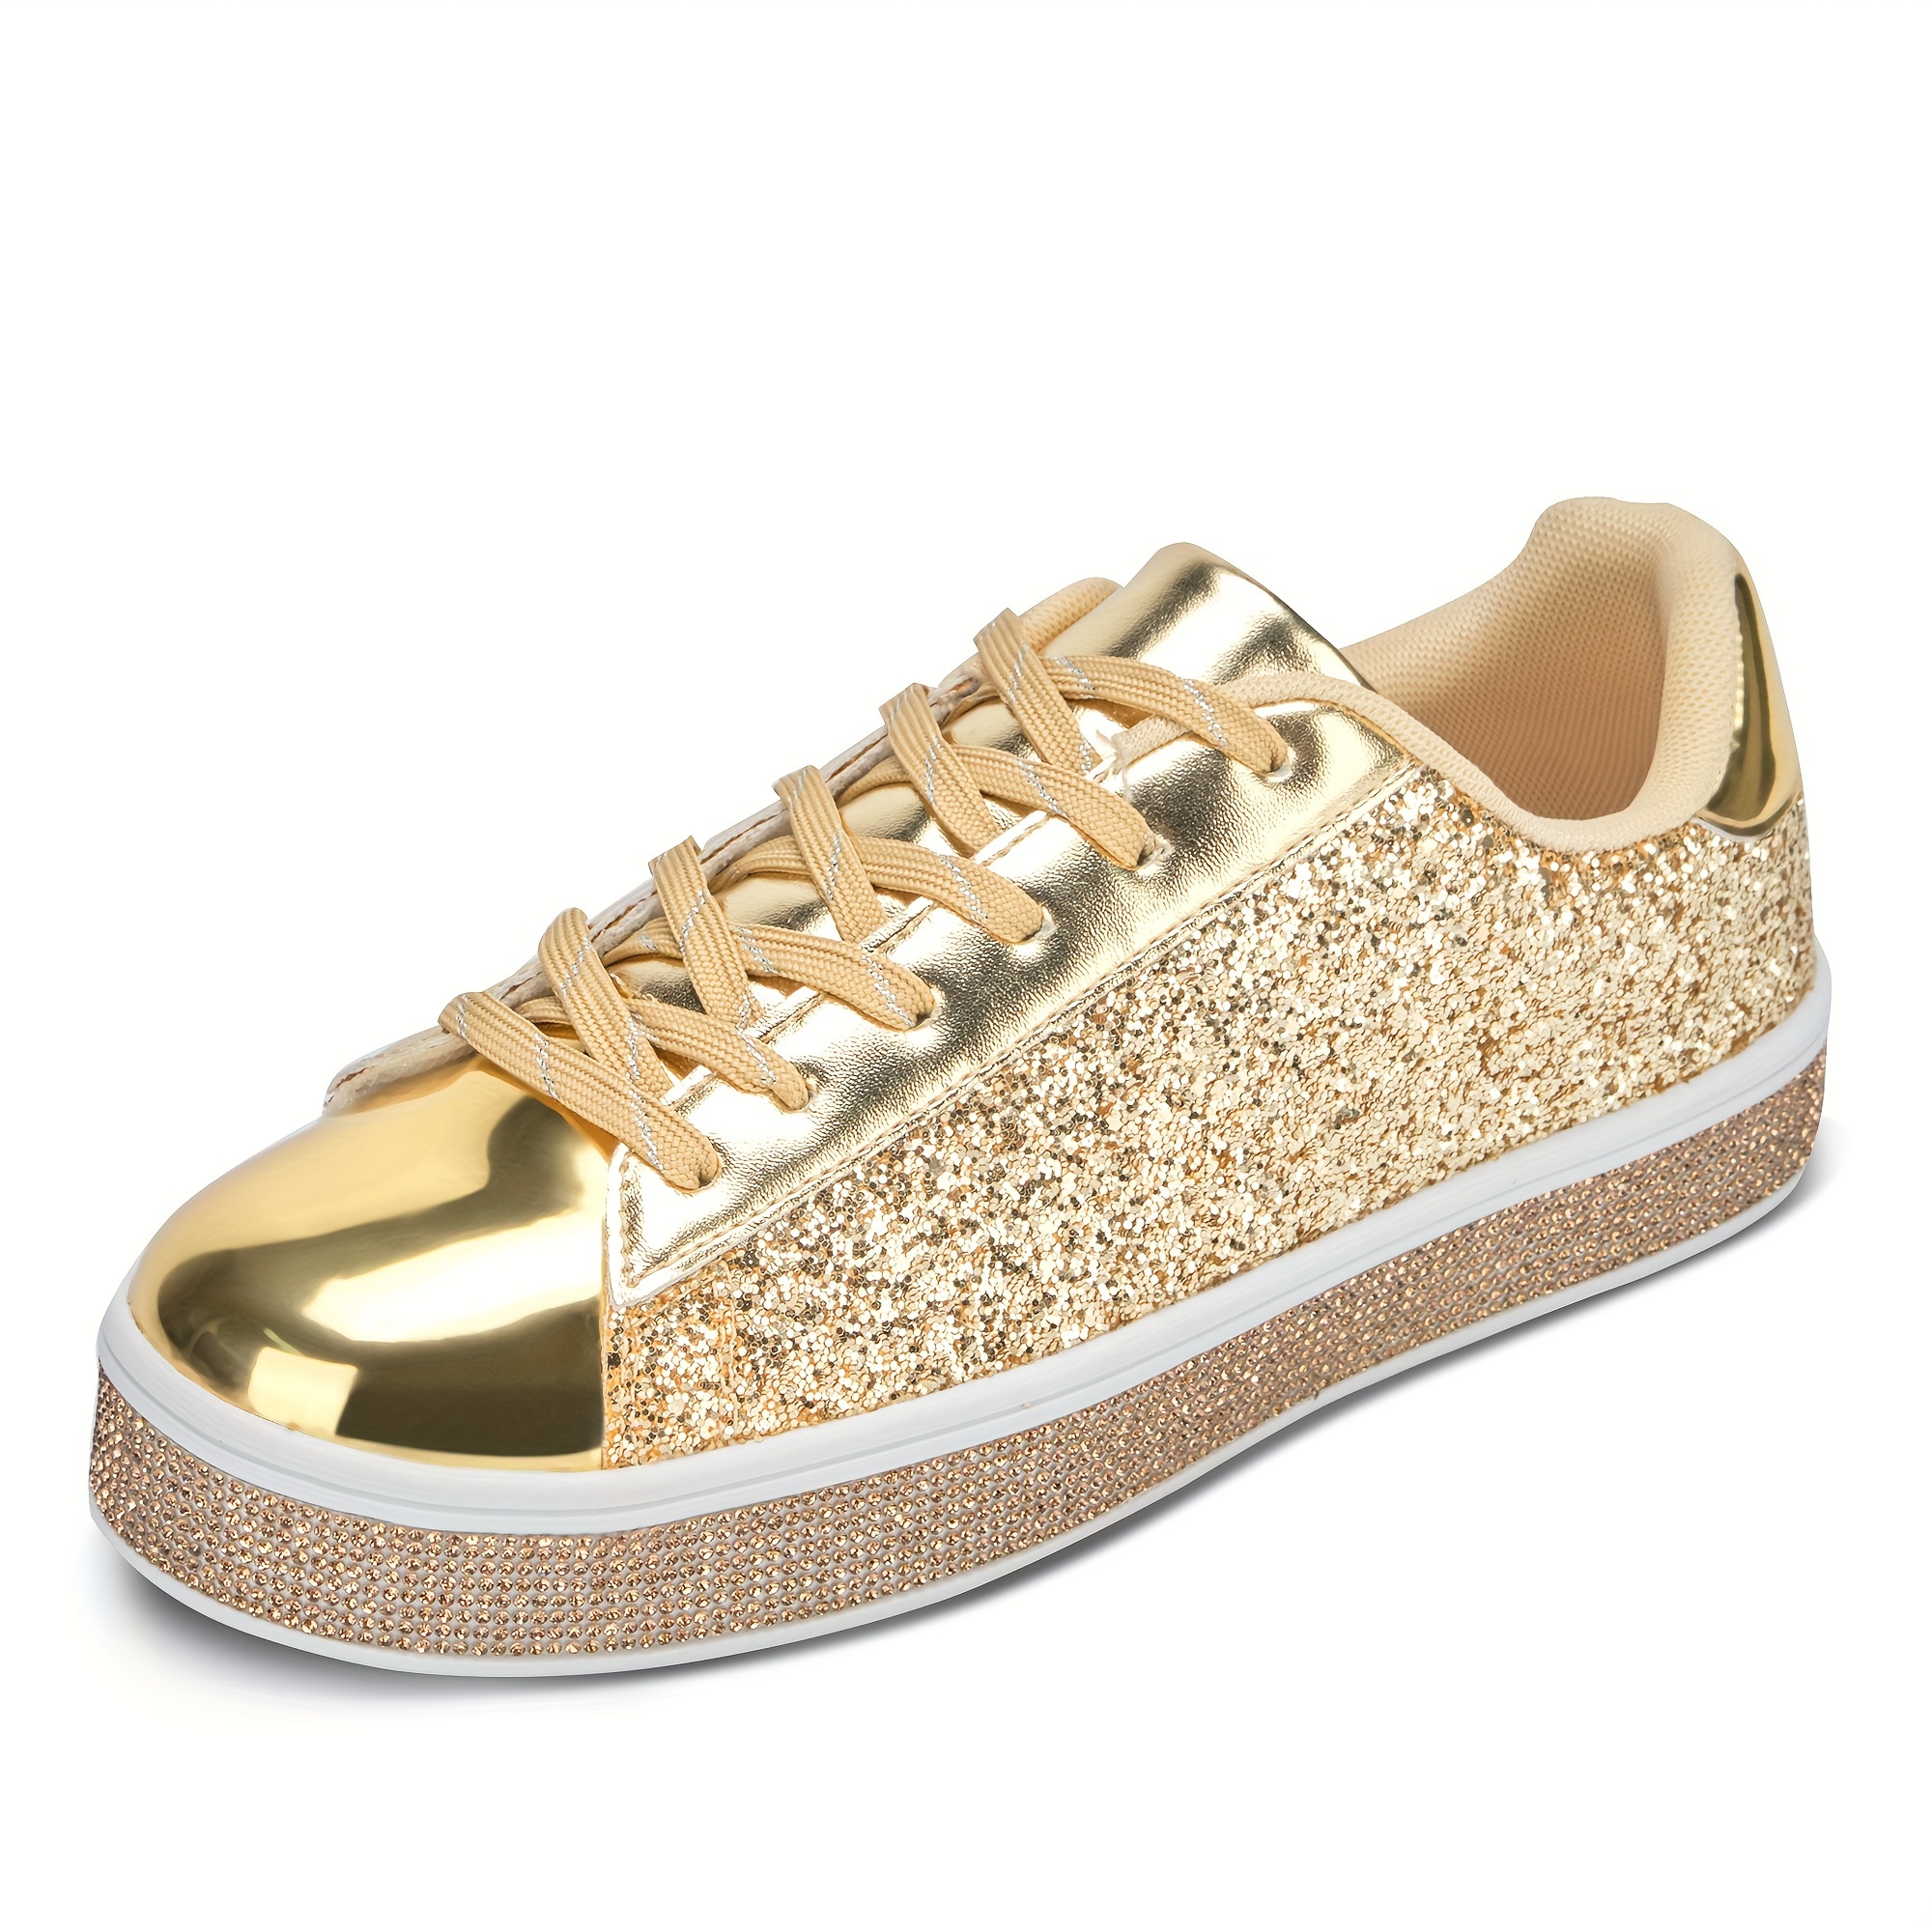 oiky UUBARIS Women‘s Glitter Tennis Sneakers Sparkling Lace Up Low Top ...